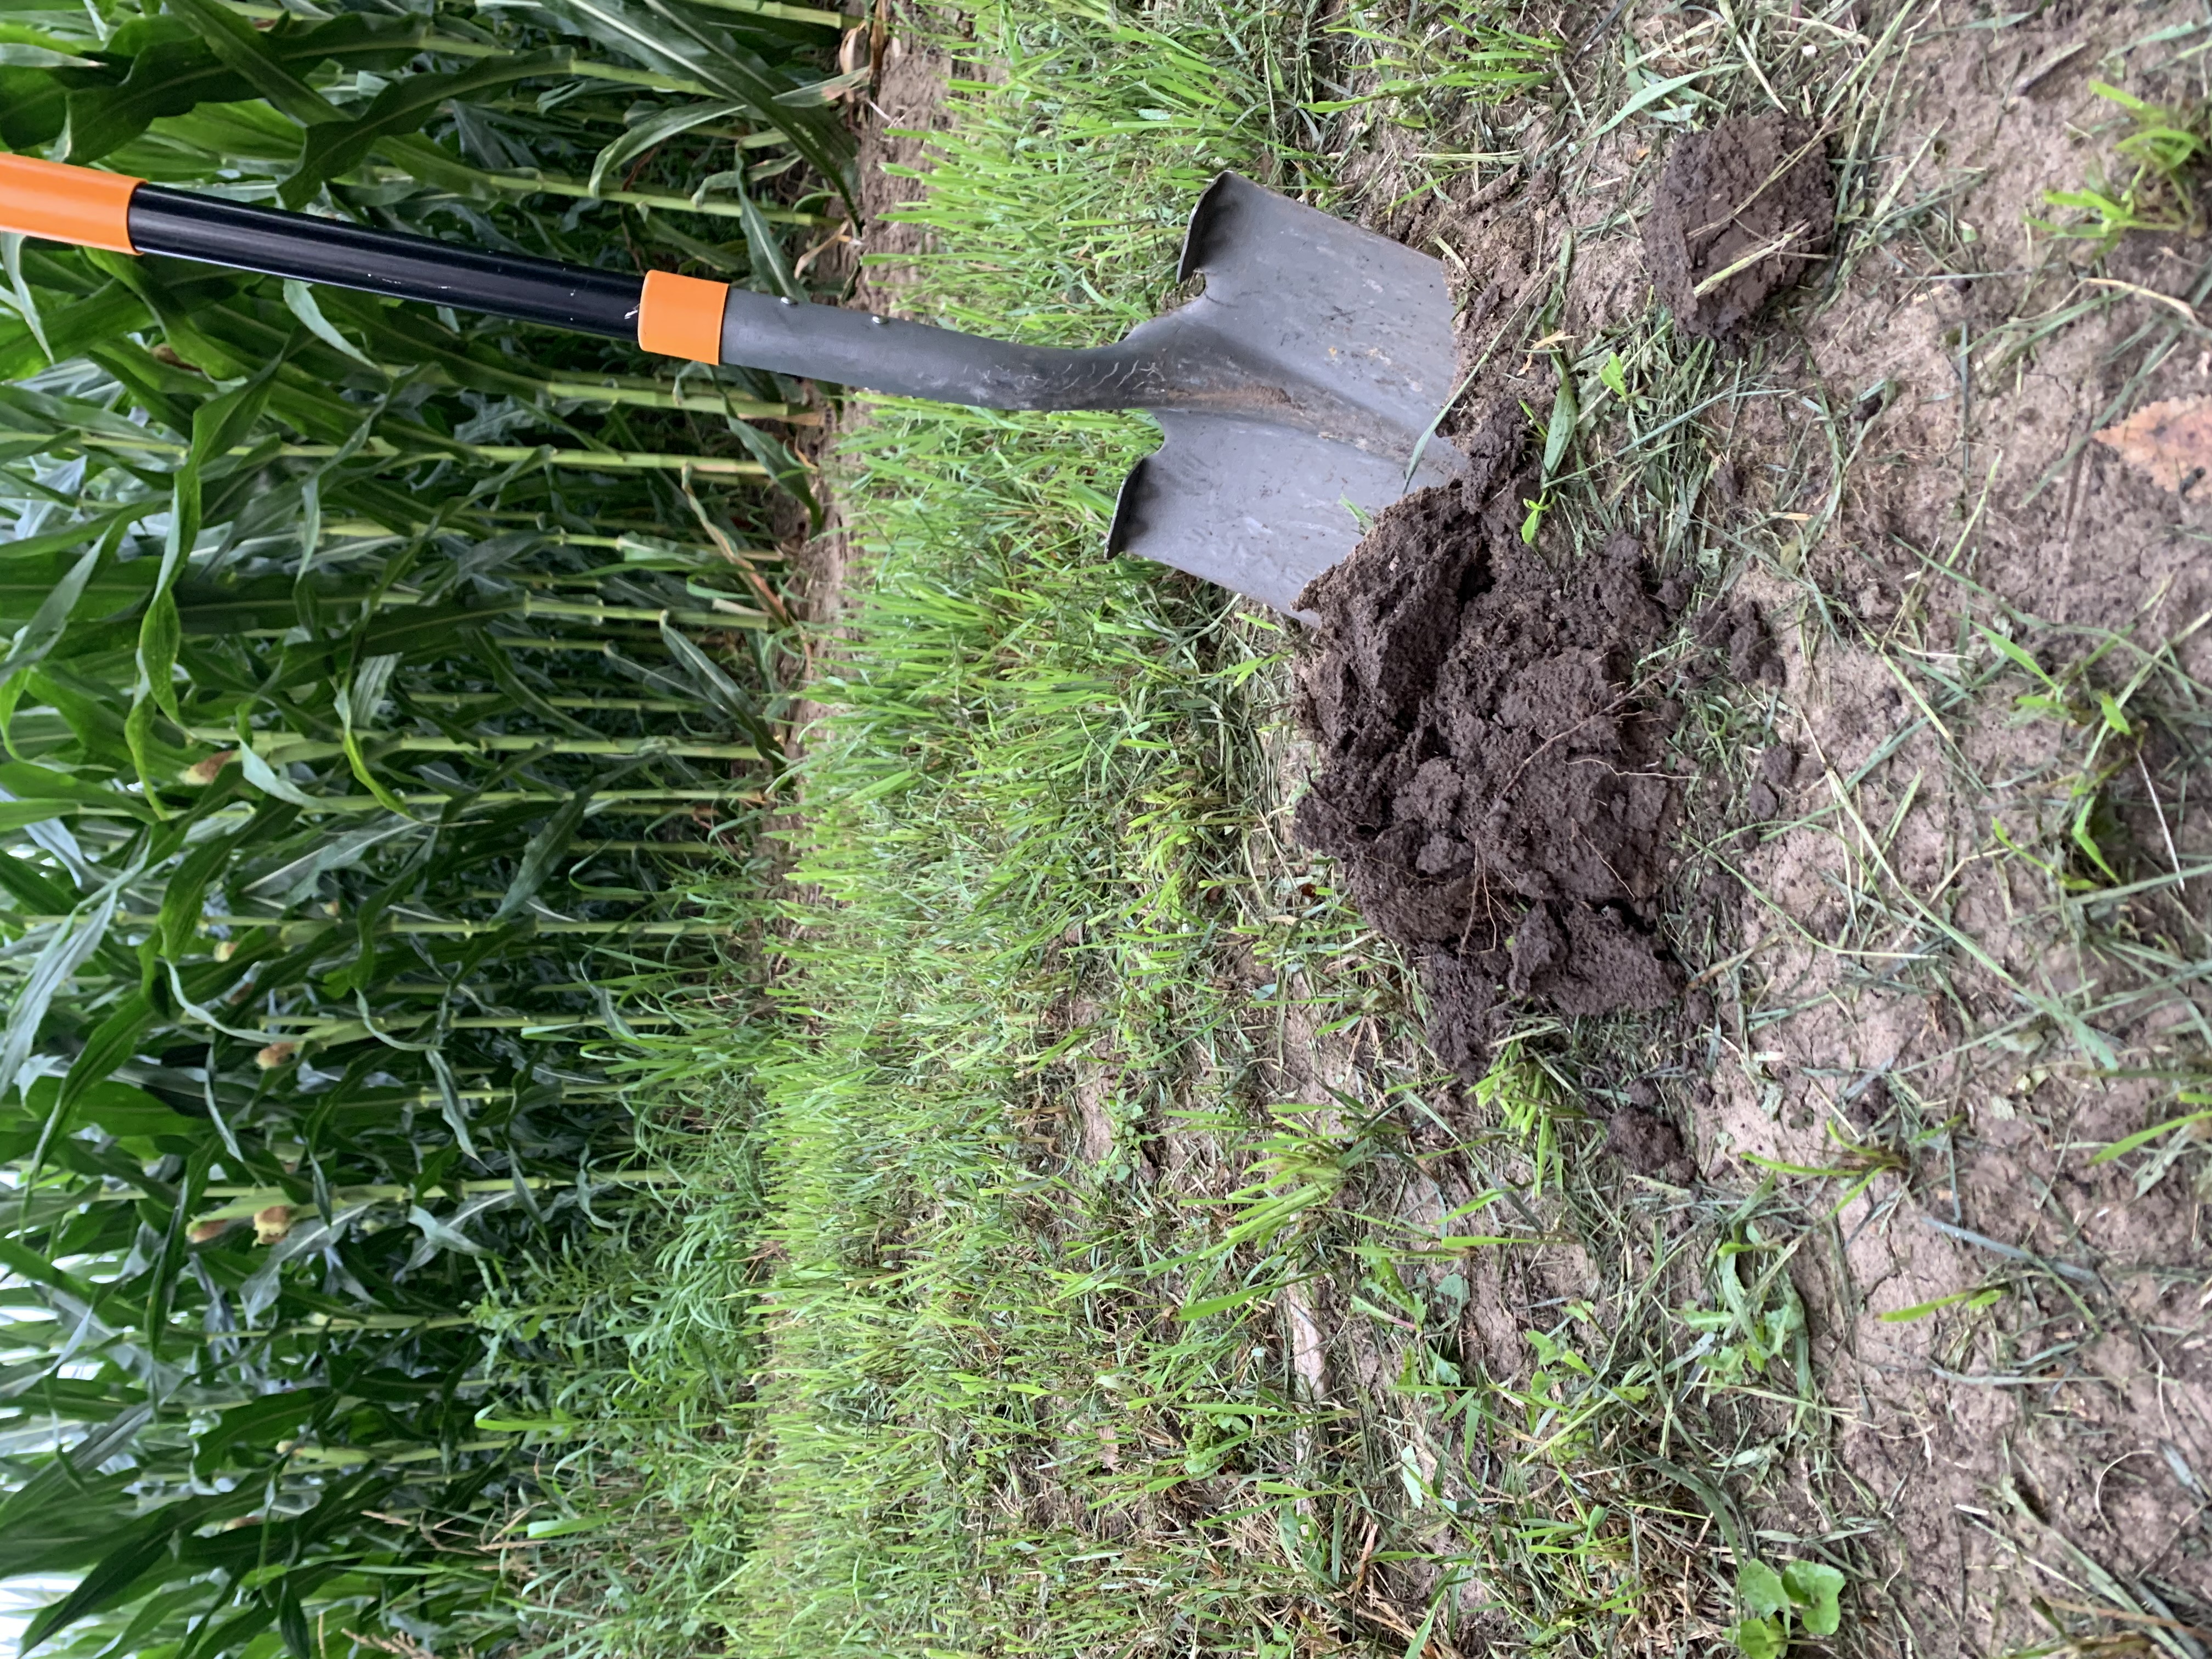 A spade has turned a scoop of dirt next to a cornfield